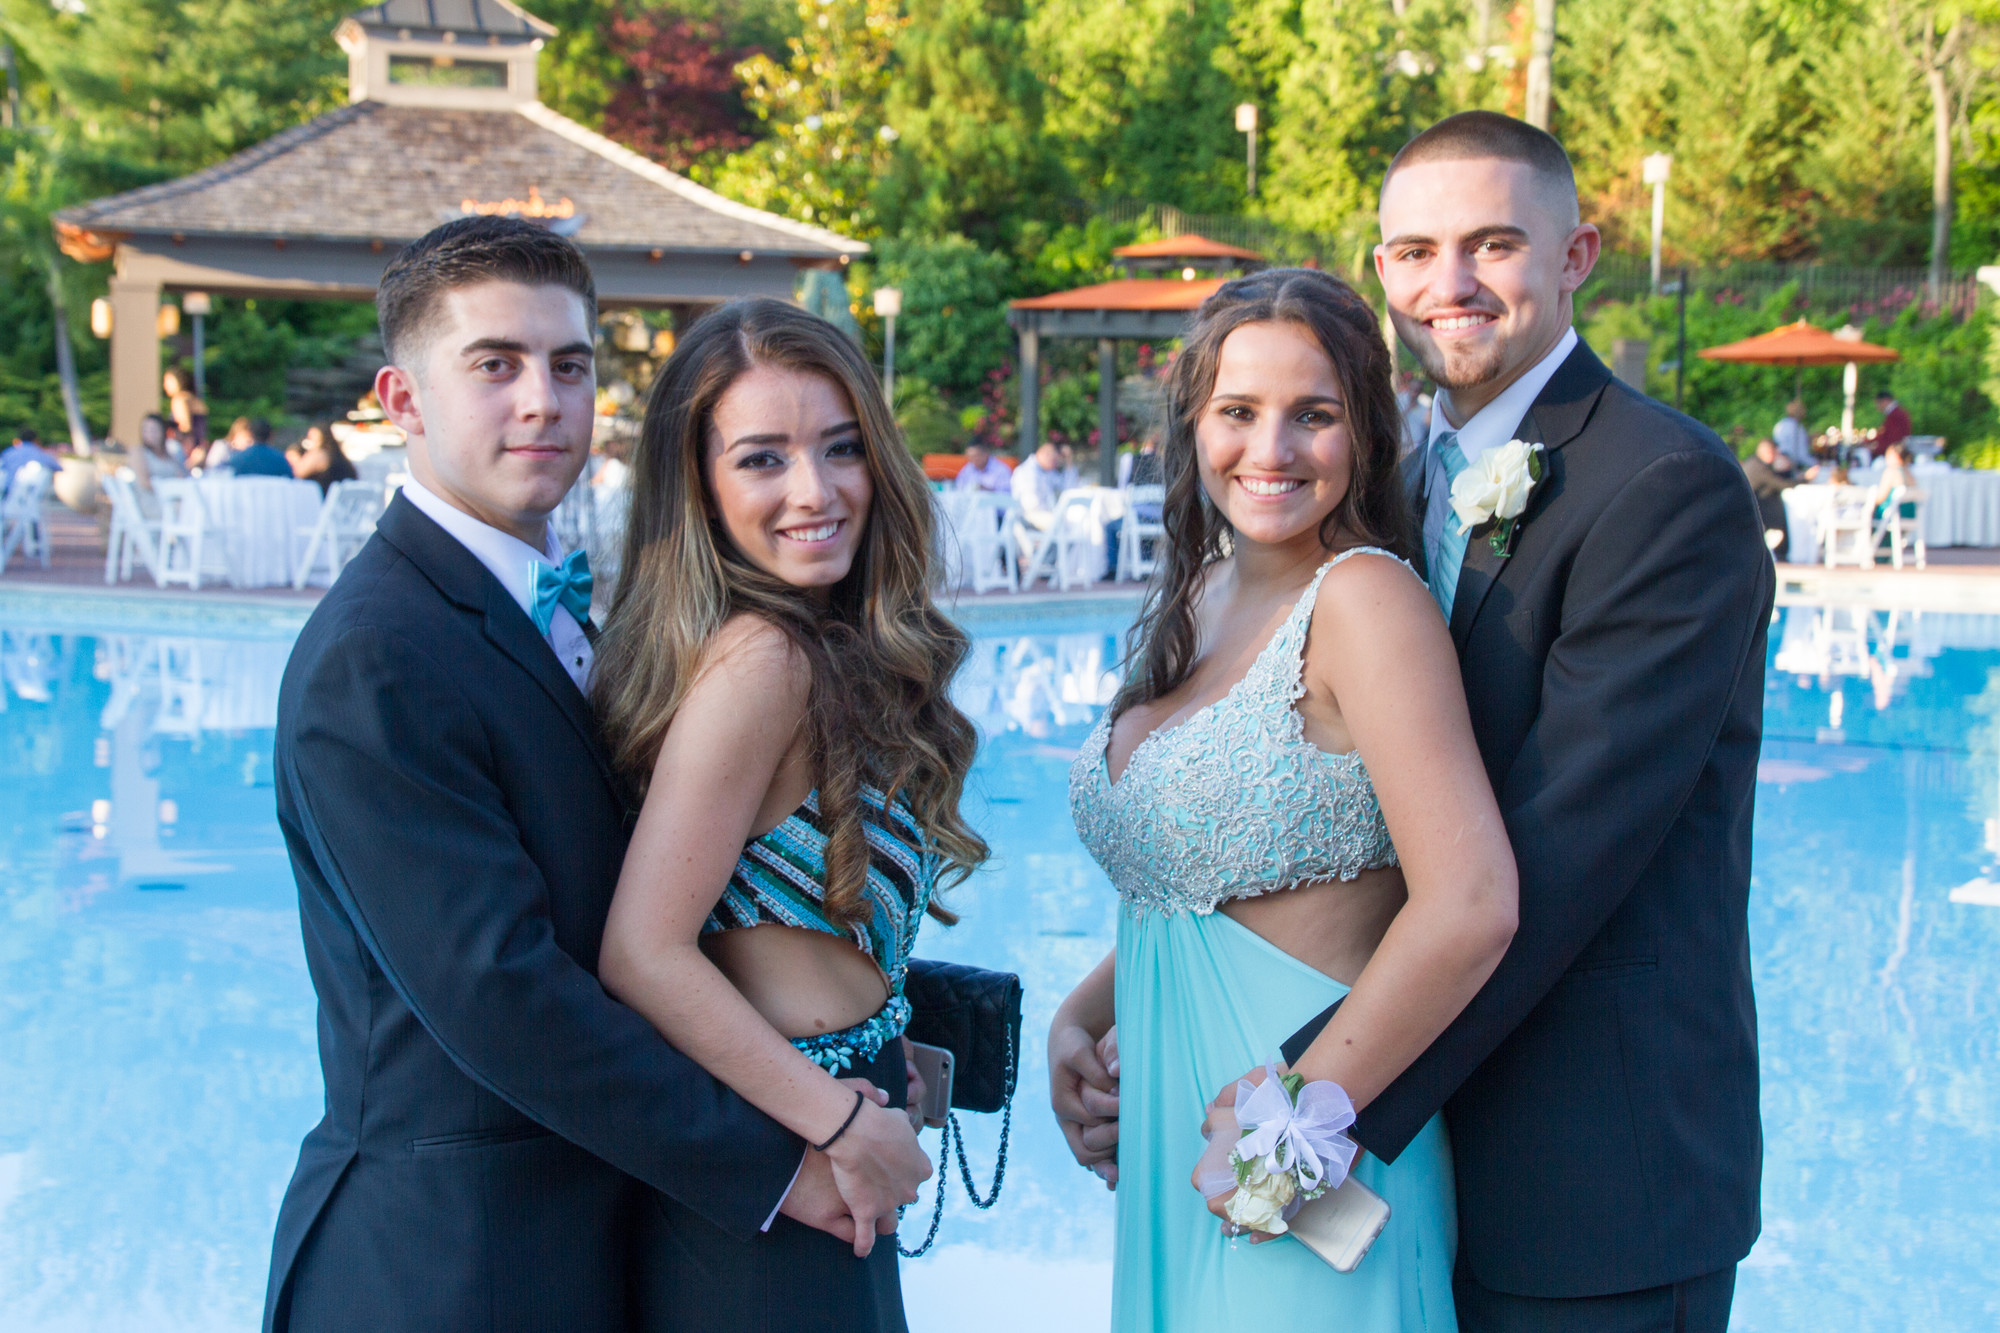 Charlie Ripepe, Christie Rodriquez, Amanda Rizzo, and Tim Nolan posed by the pool.